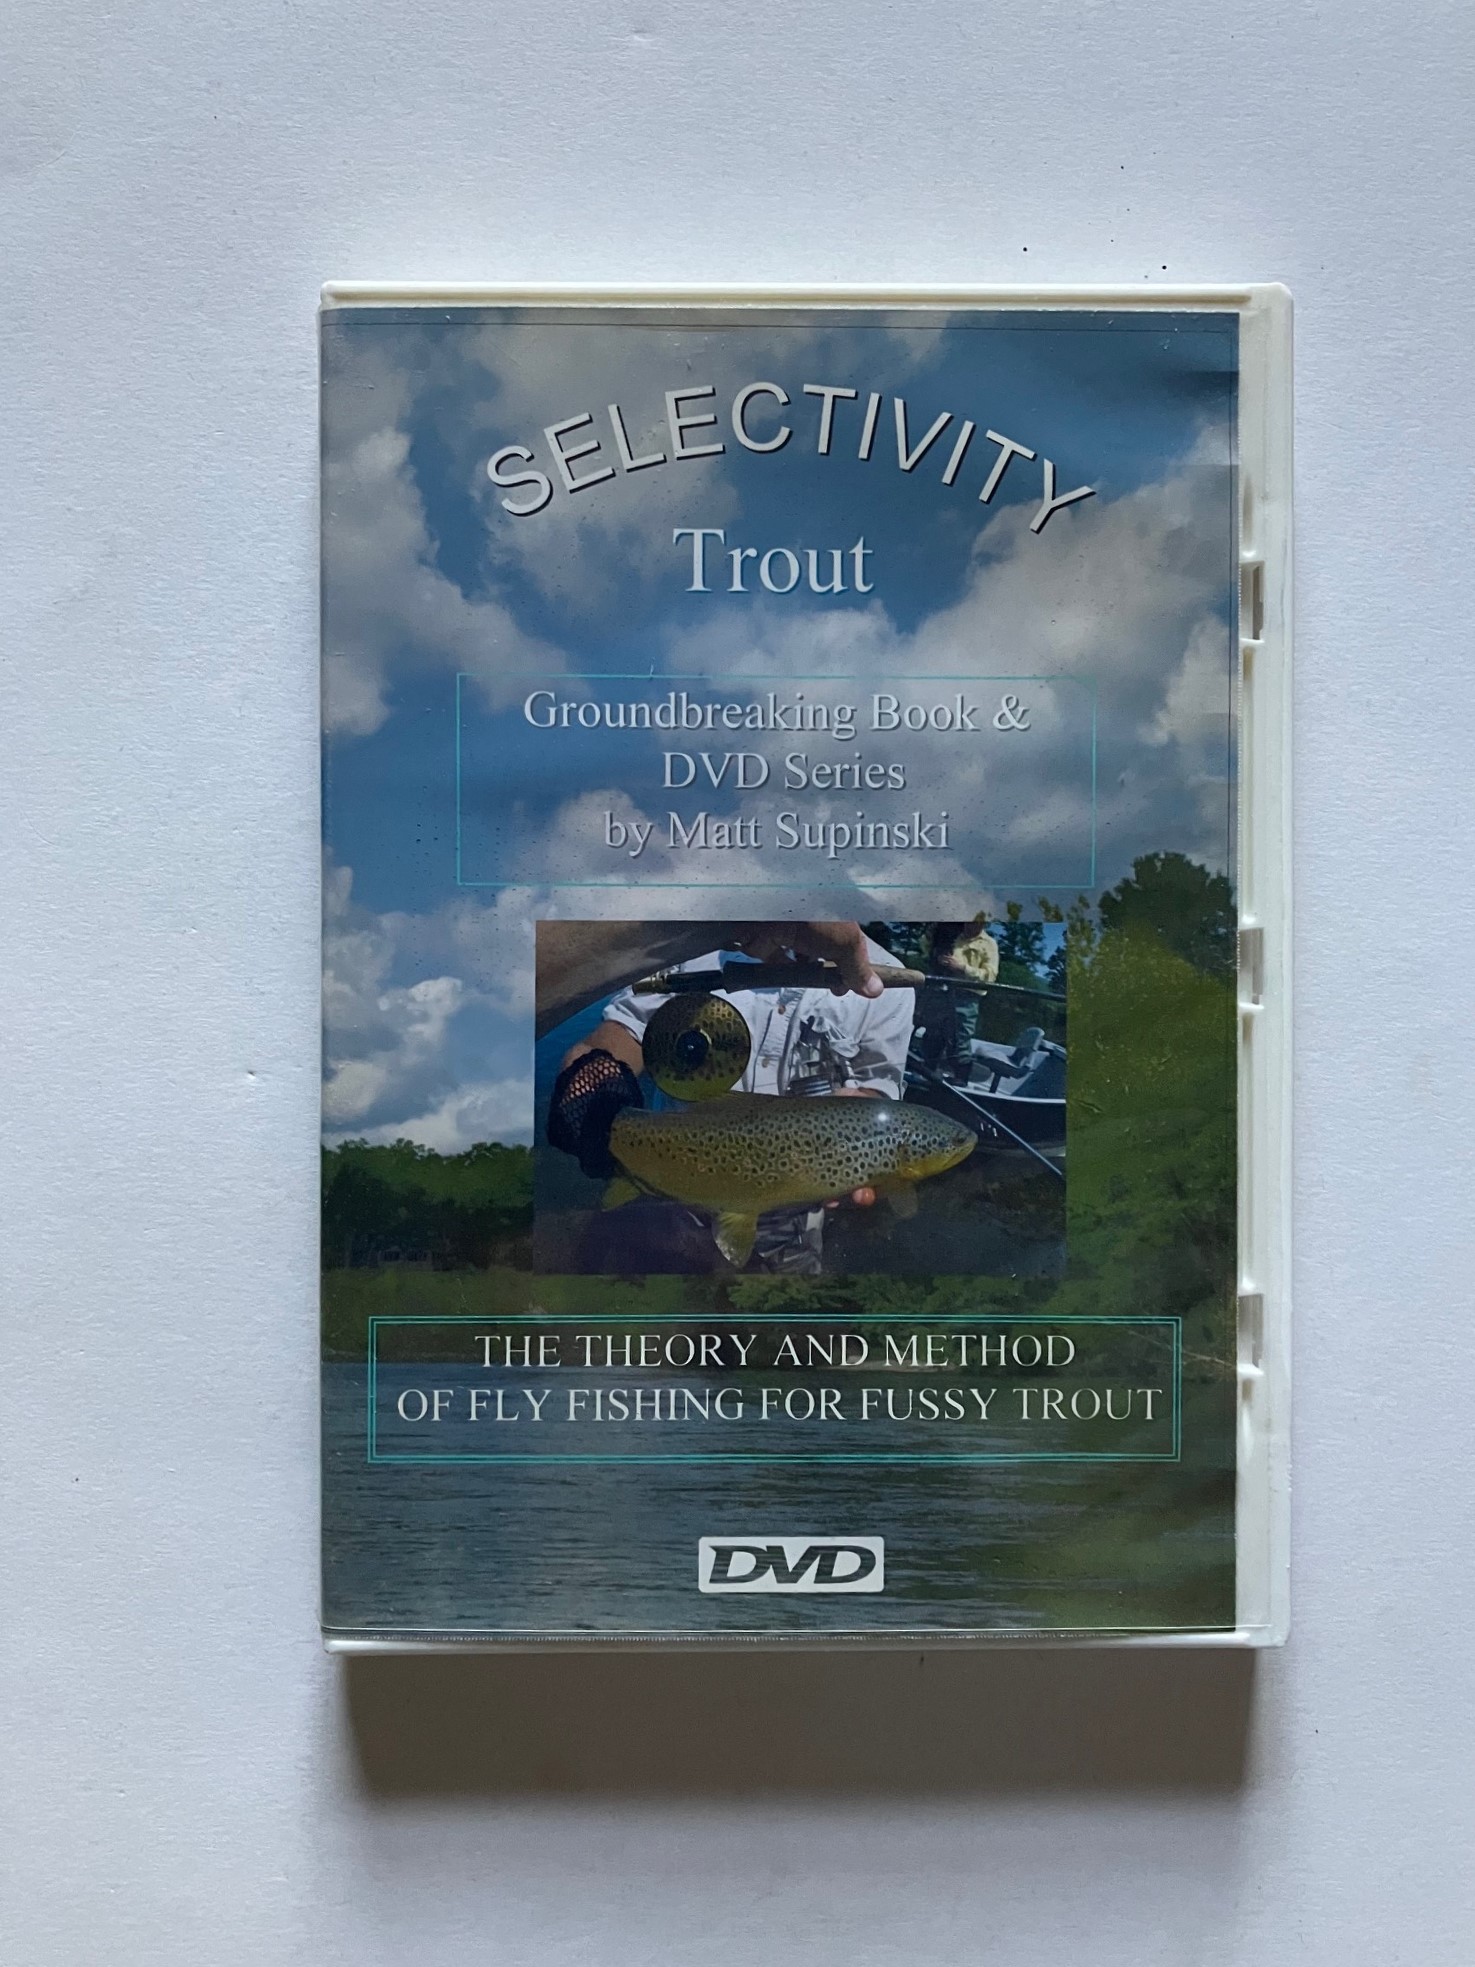 Slectivity Trout DVD